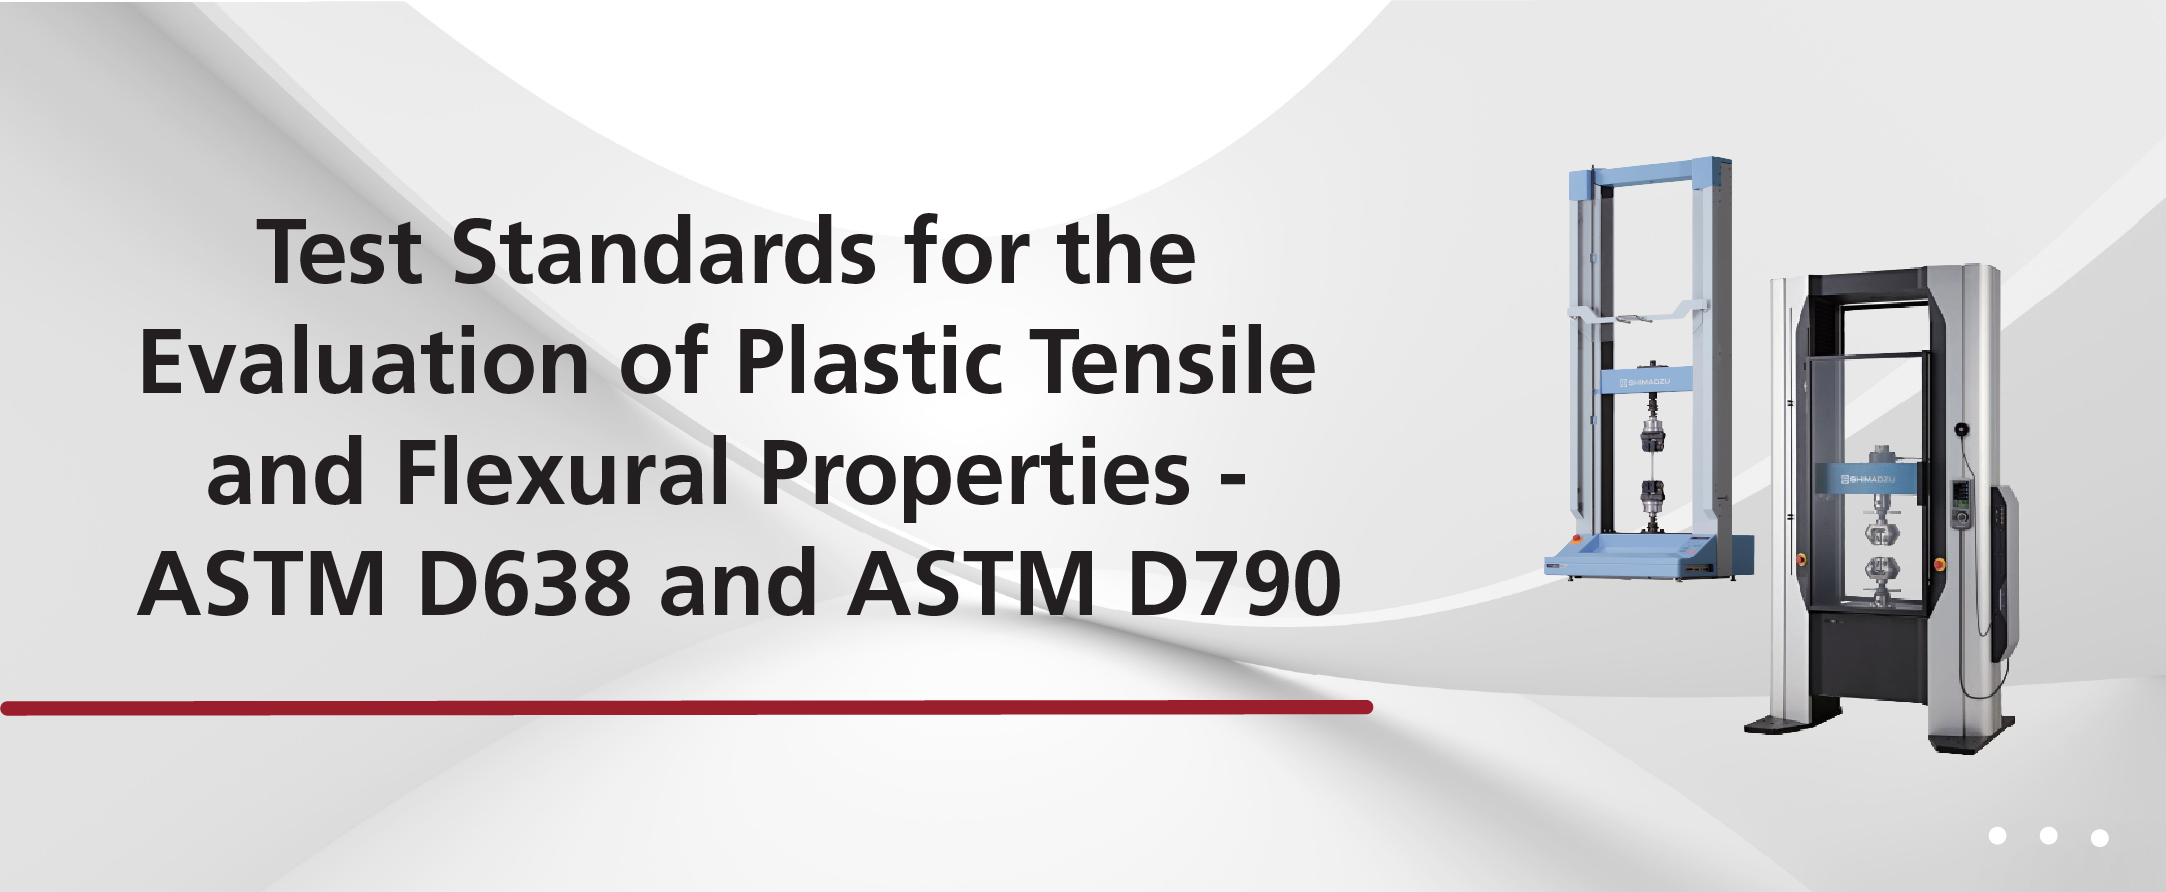 Test Standards for the Evaluation of Plastic Tensile and Flexural Properties